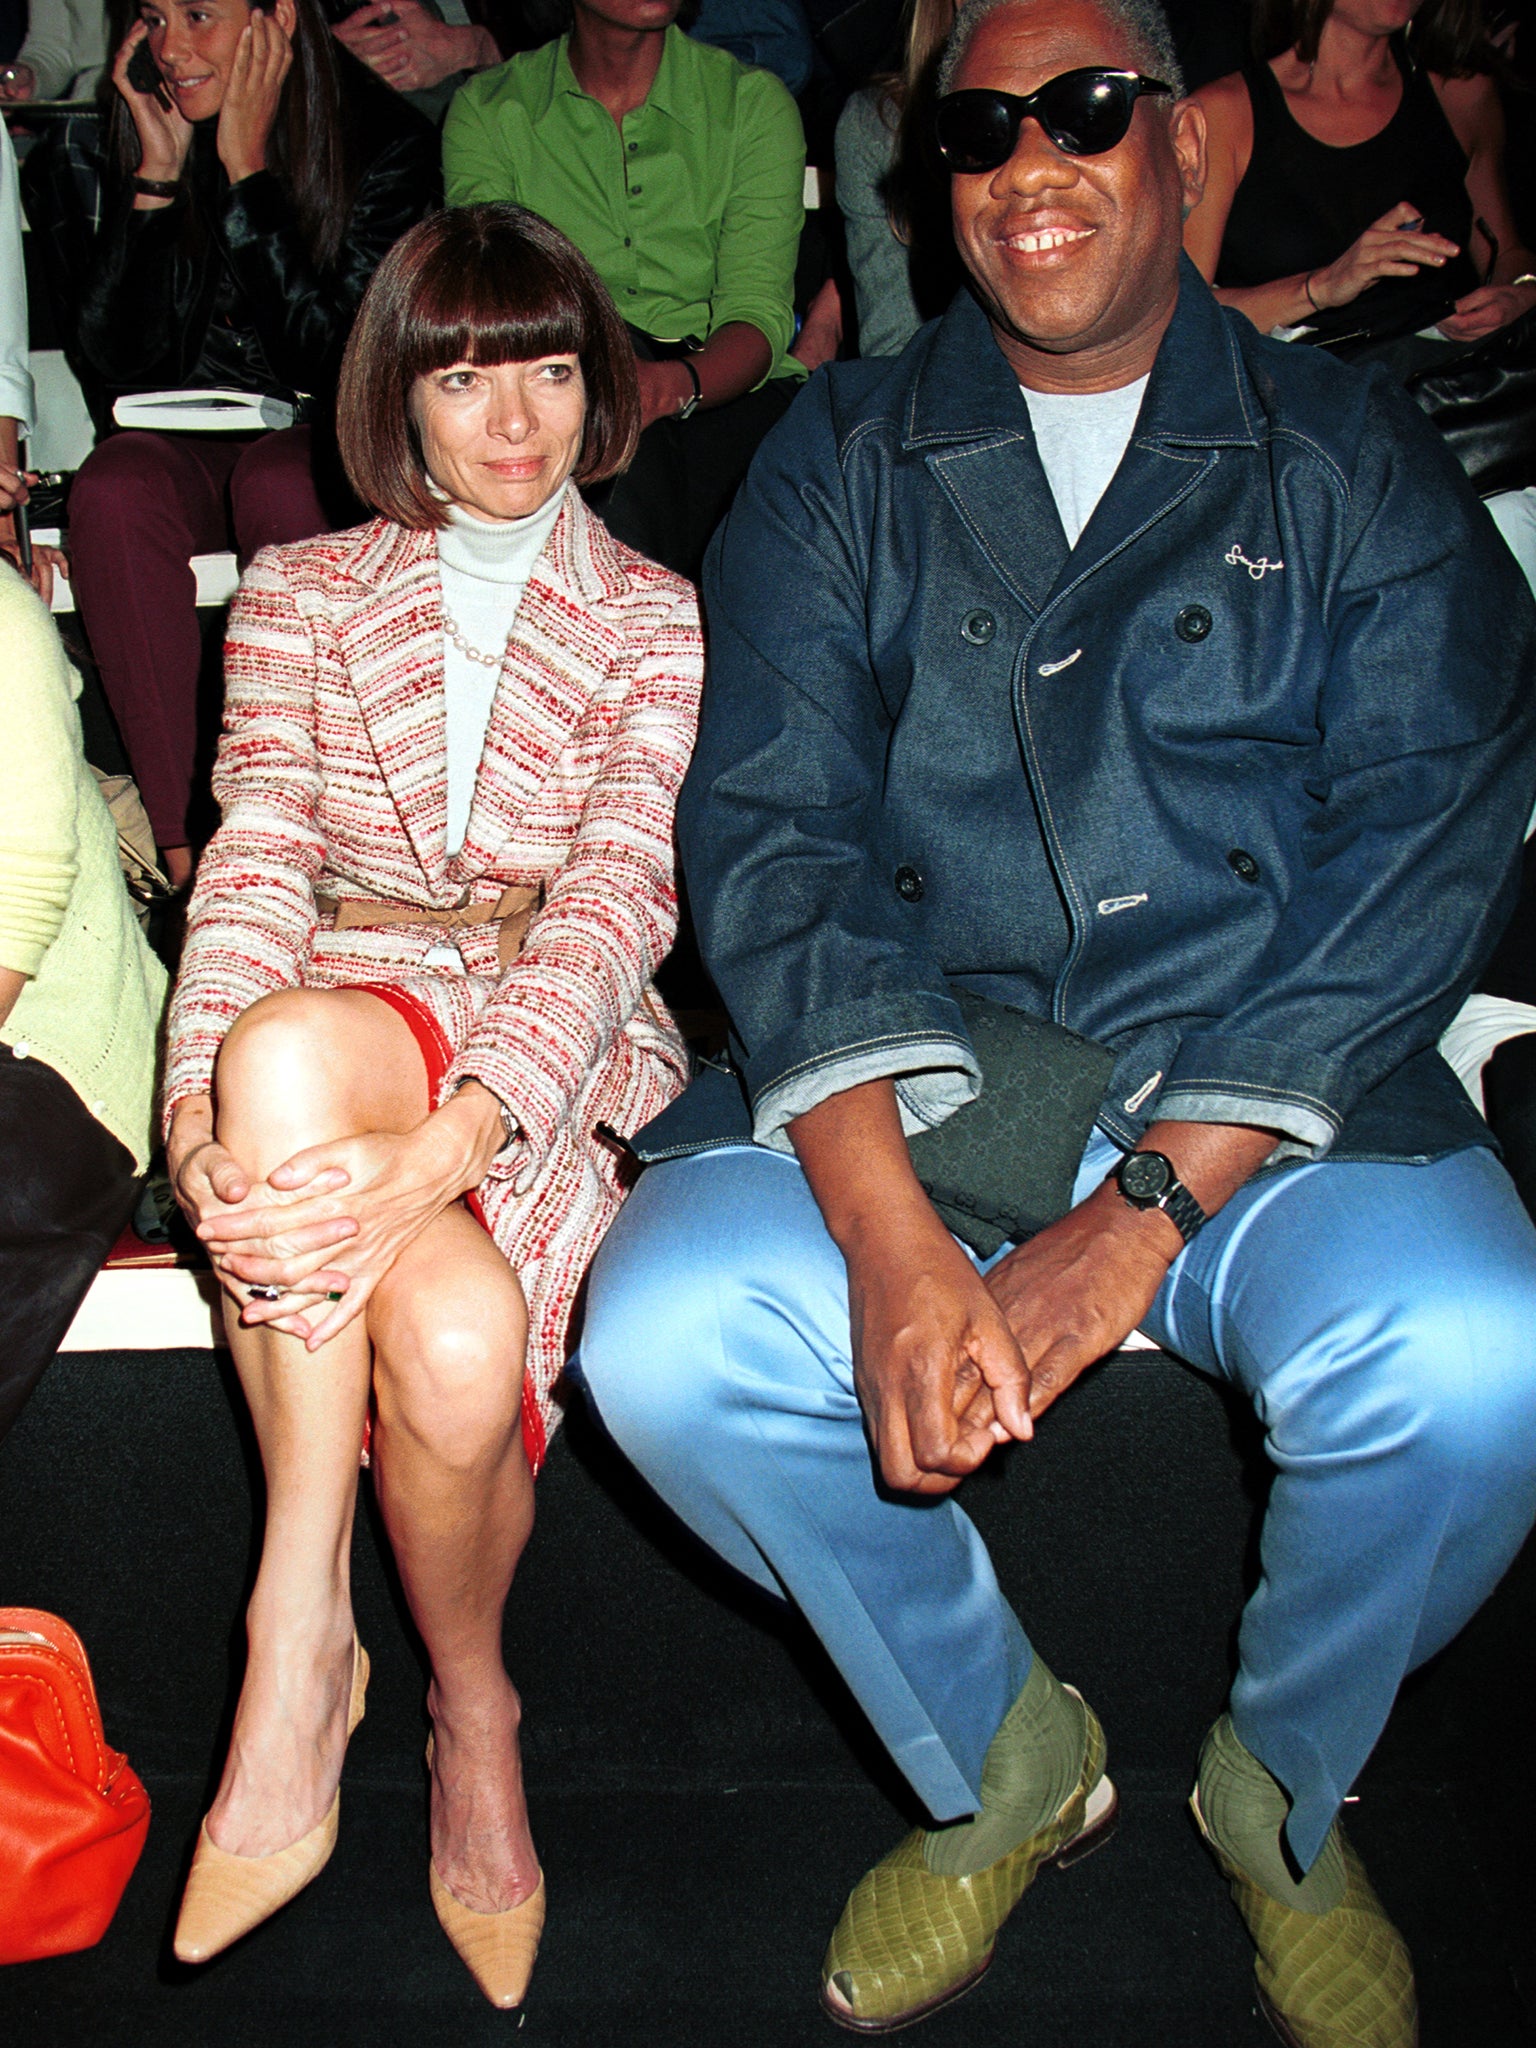 With fellow Vogue editor Anna Wintour at the Donna Karan Spring 2001 show in New York